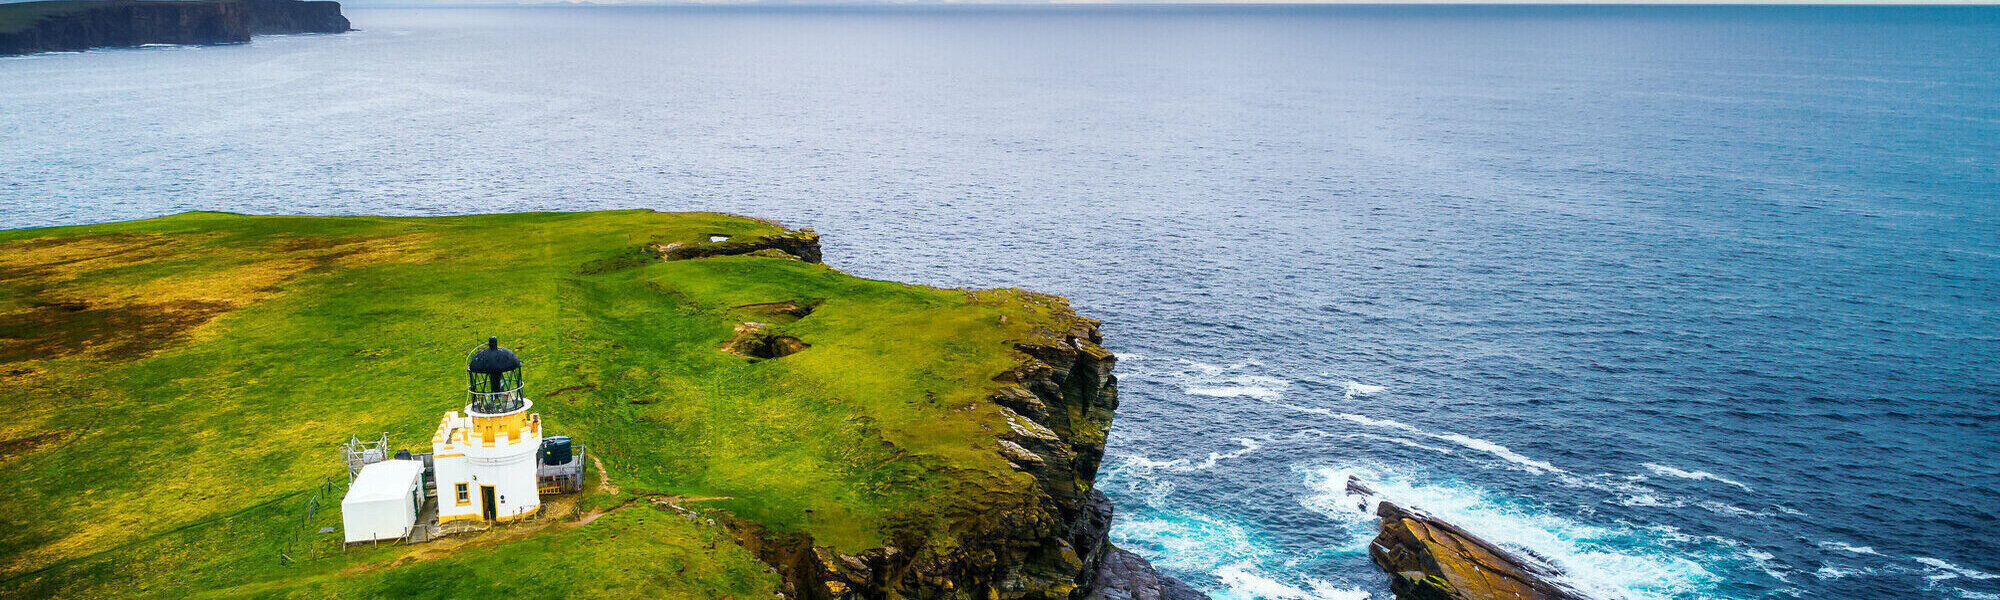 An aerial image of Brough of Birsay Lighthouse on the Orkney Islands